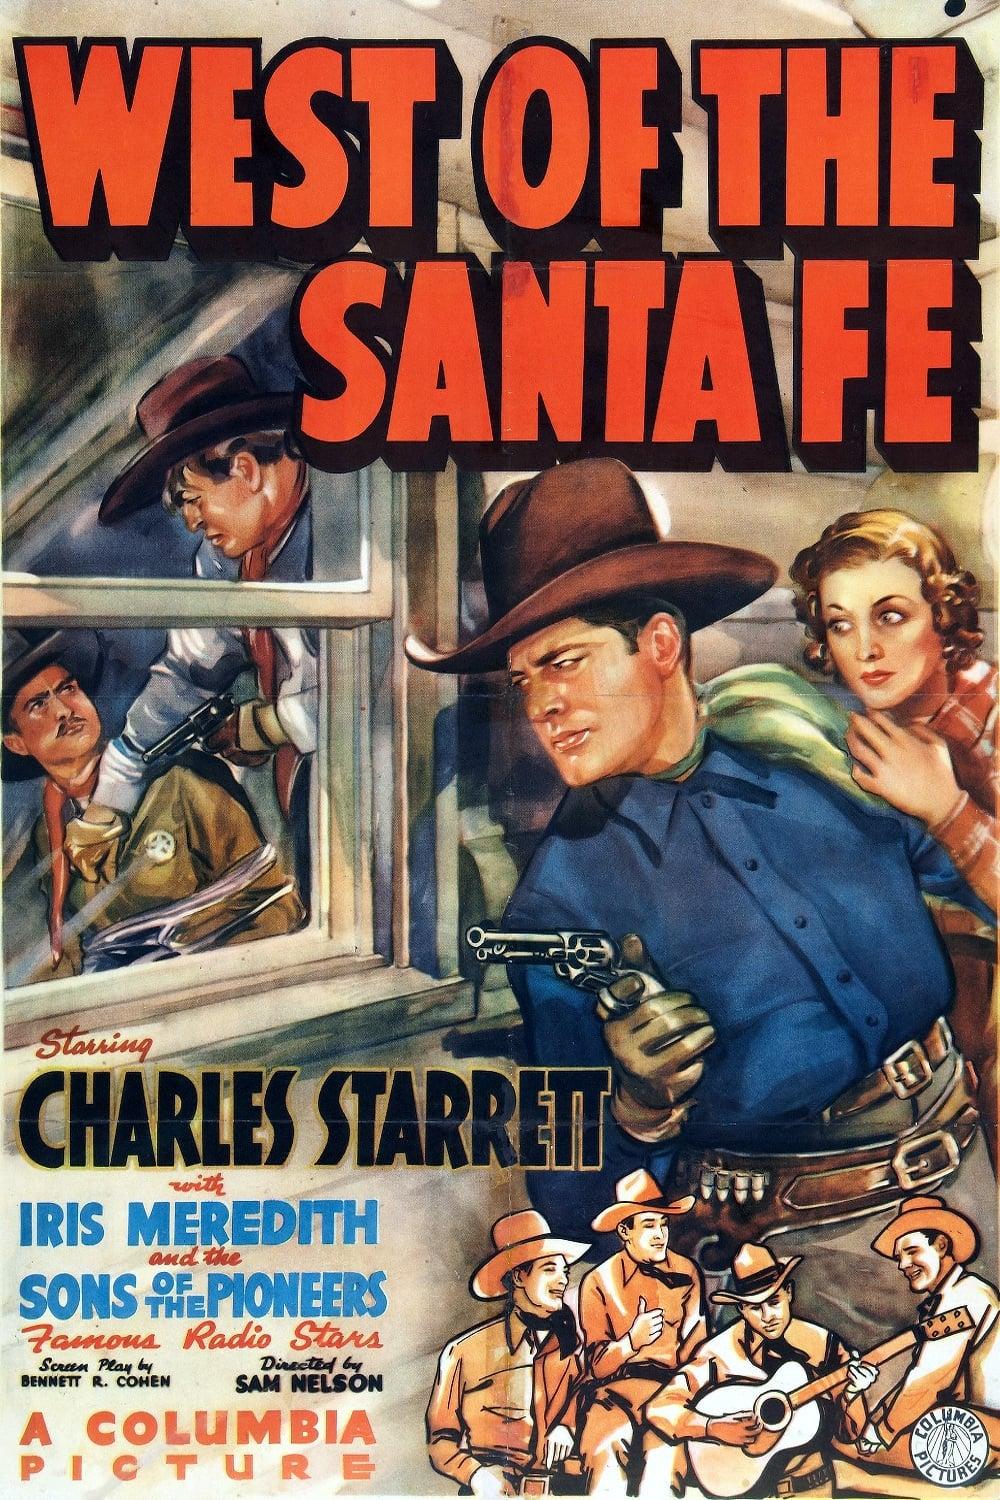 West of the Santa Fe poster